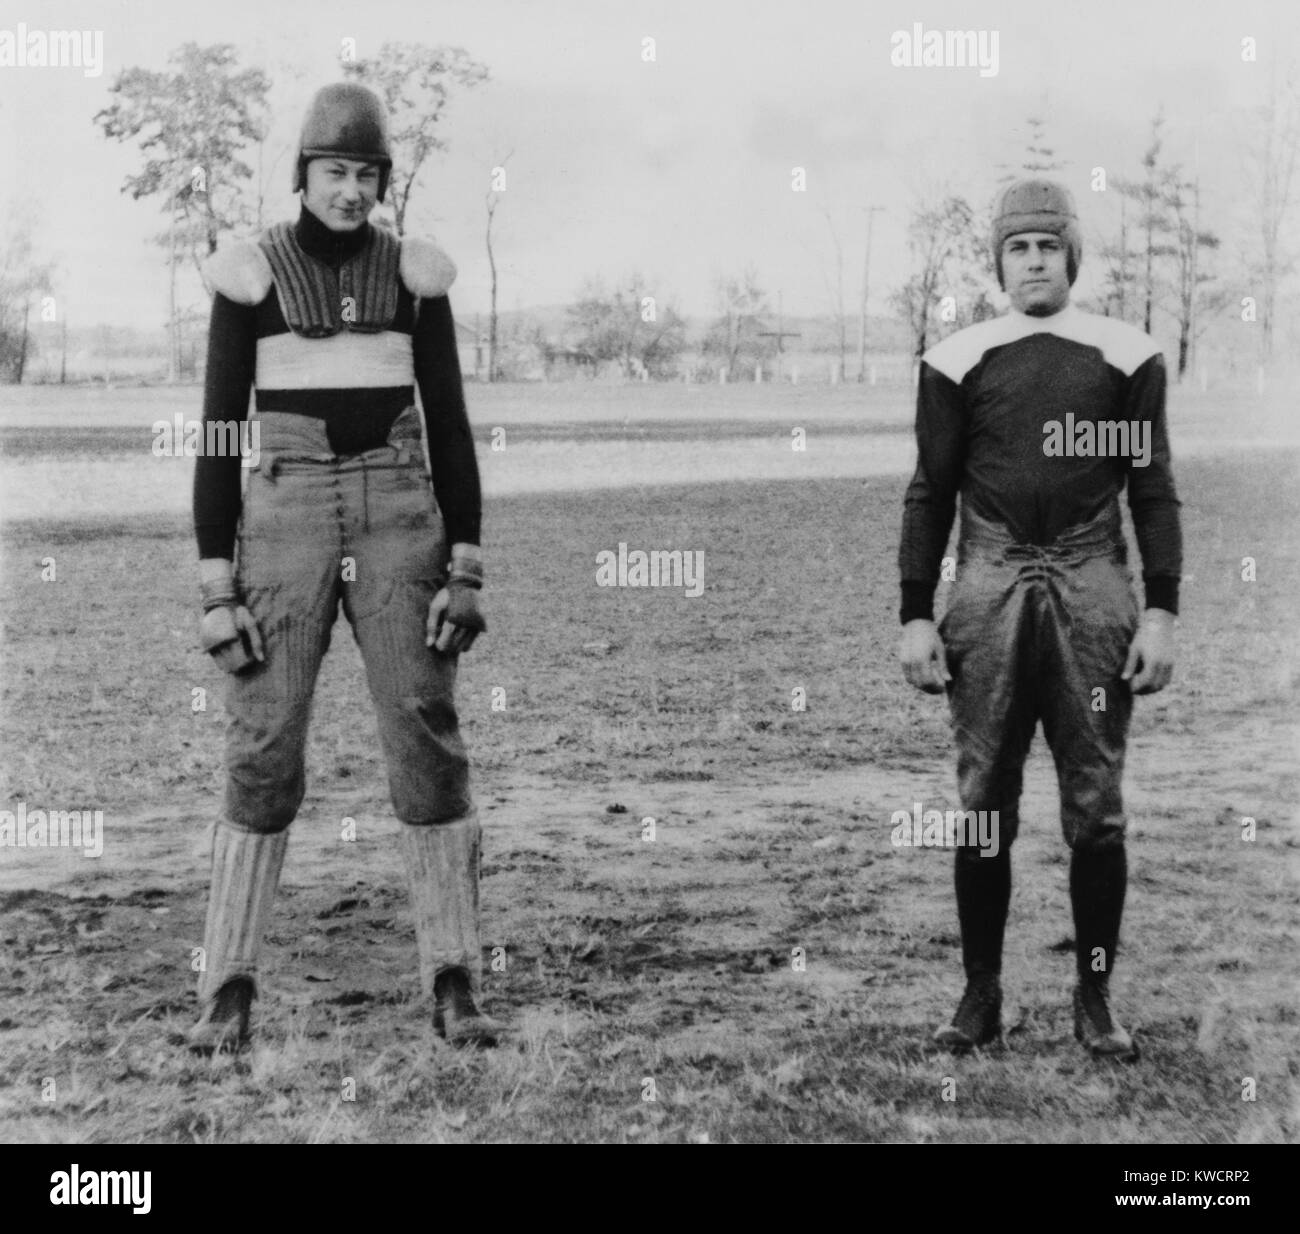 Notre Dame University football players wearing old and new football uniforms. At left is a football suit of the 1880's with external padding. At right is a 'modern' uniform with shoulder pads worn under the jersey. South Bend, Indiana. Ca. 1930. - (BSLOC 2015 1 220) Stock Photo